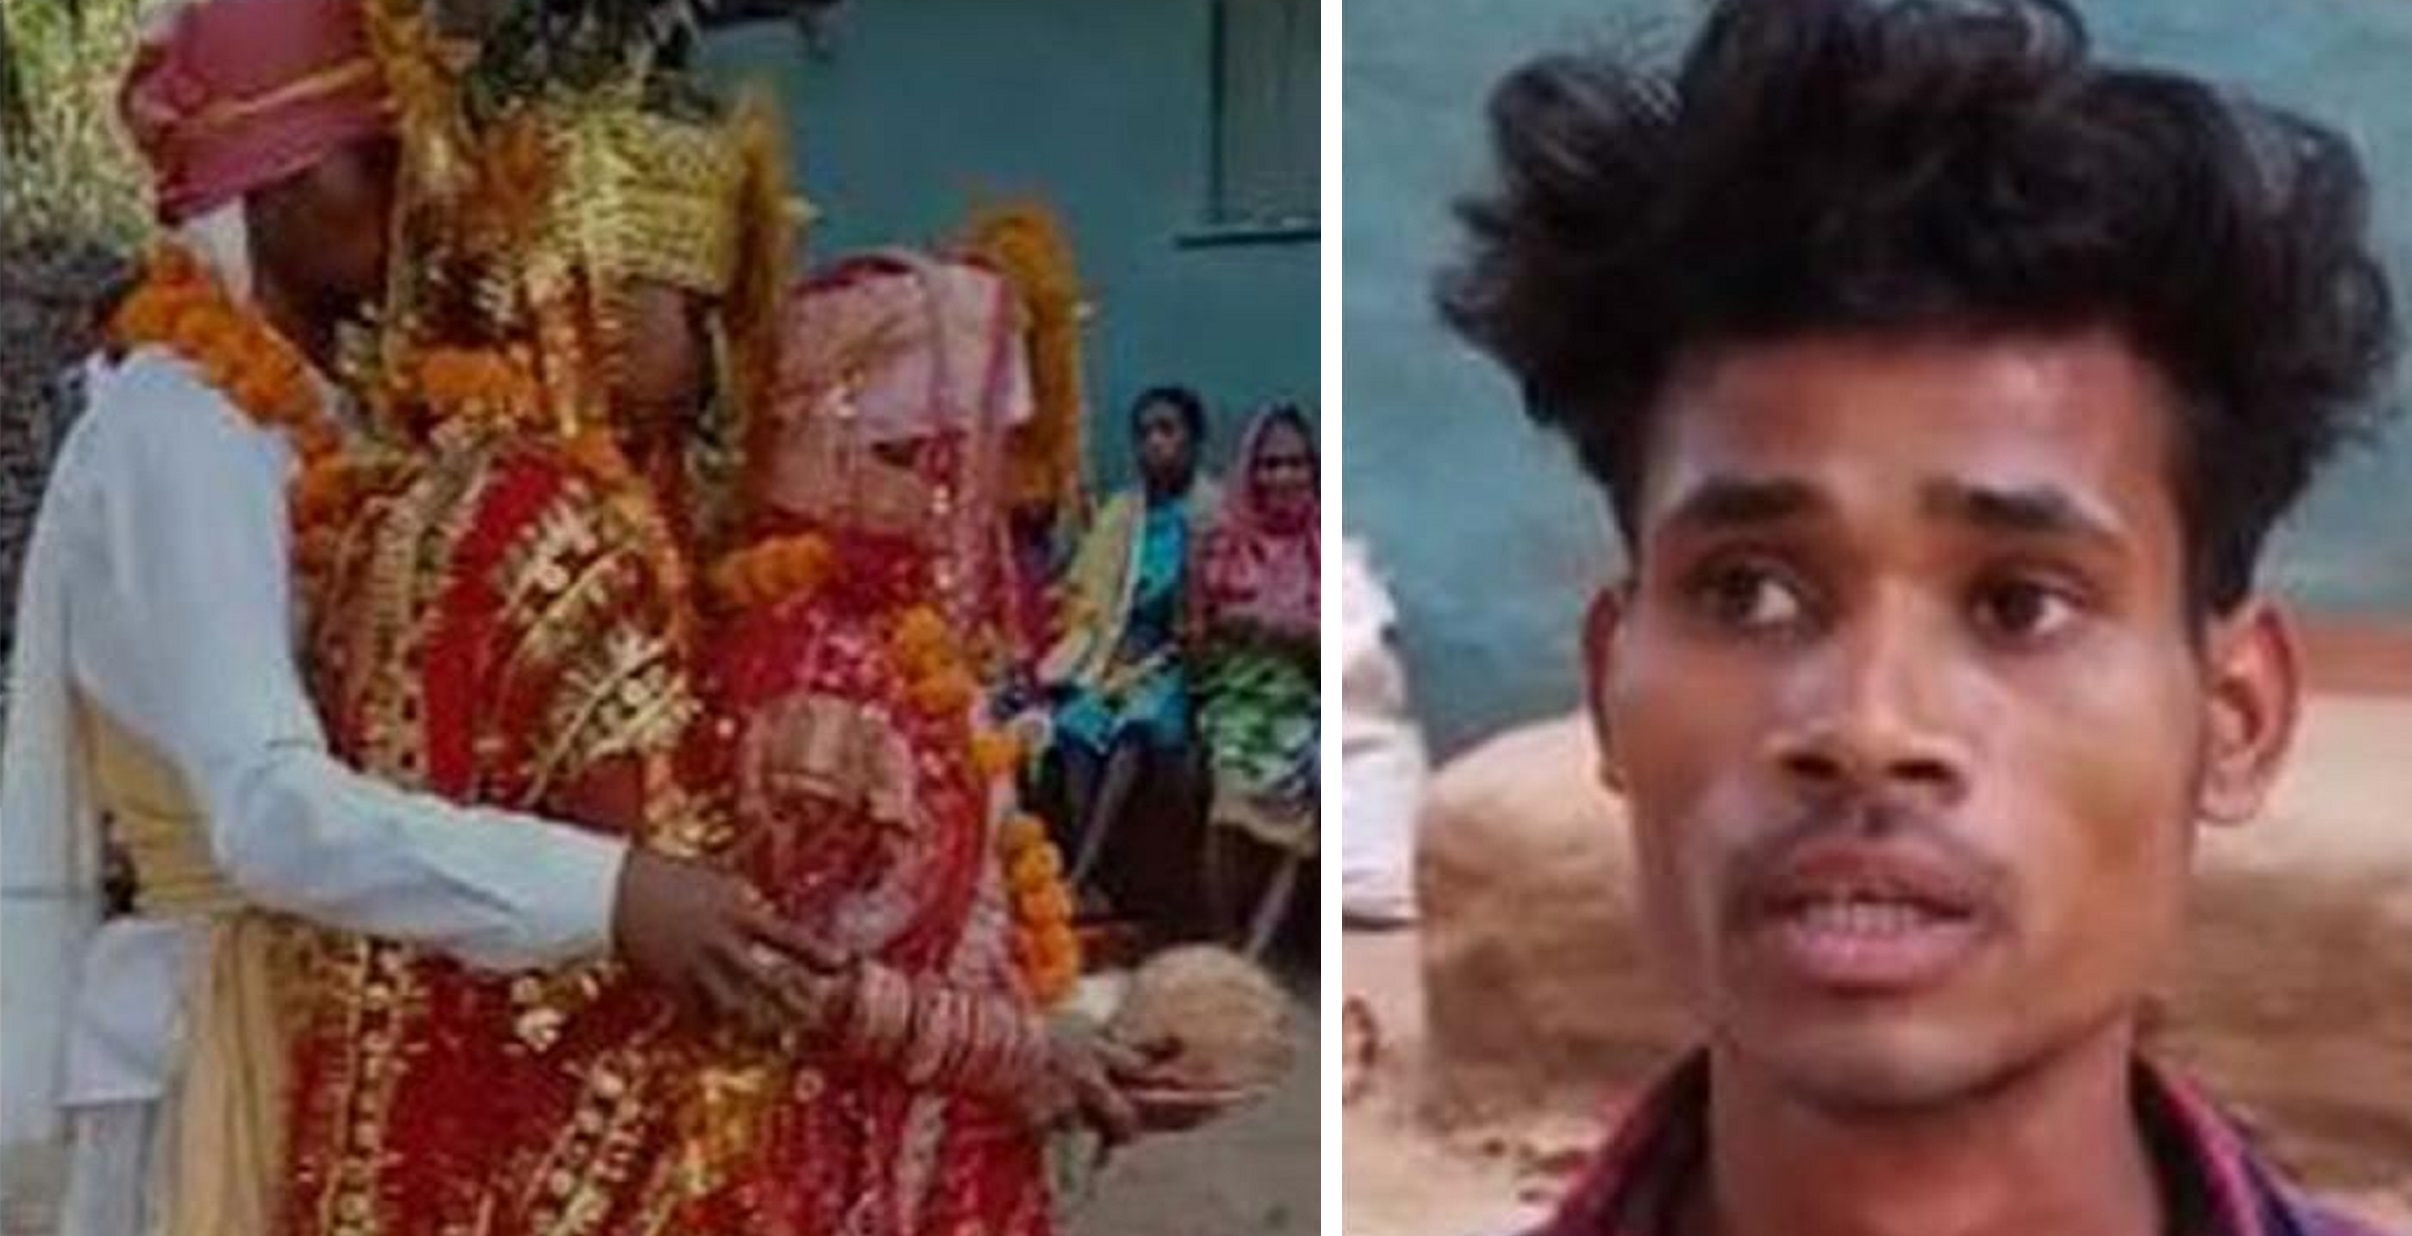 Man Marries 2 Women on Same Day, Both Wives Say They are ‘Very Happy’